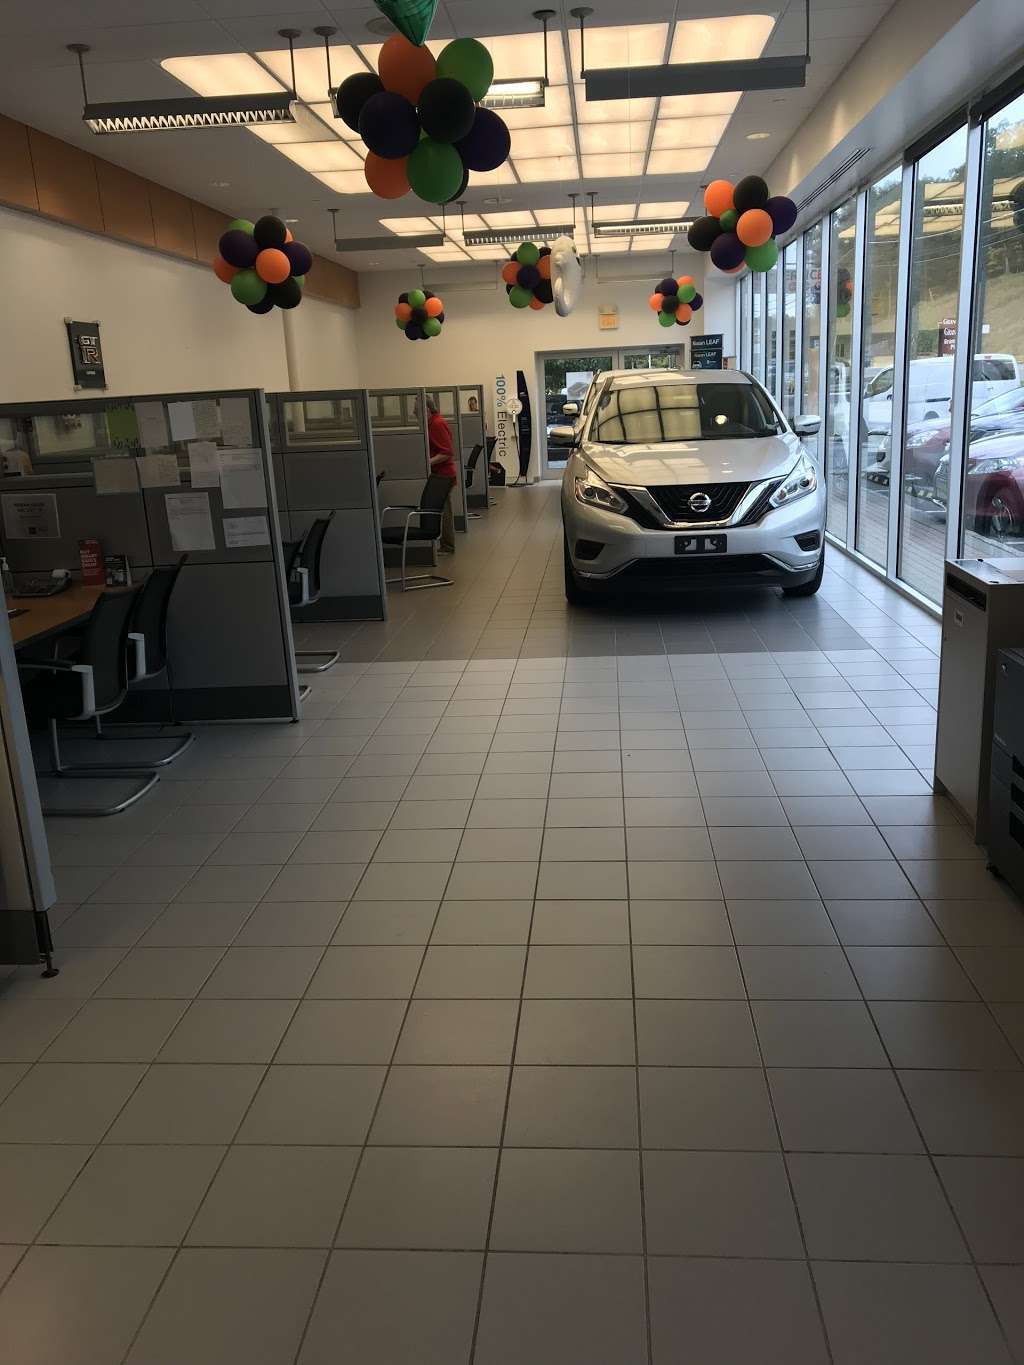 Nissan of Yorktown Heights | 3495 Old Crompond Rd, Yorktown Heights, NY 10598 | Phone: (914) 737-3500